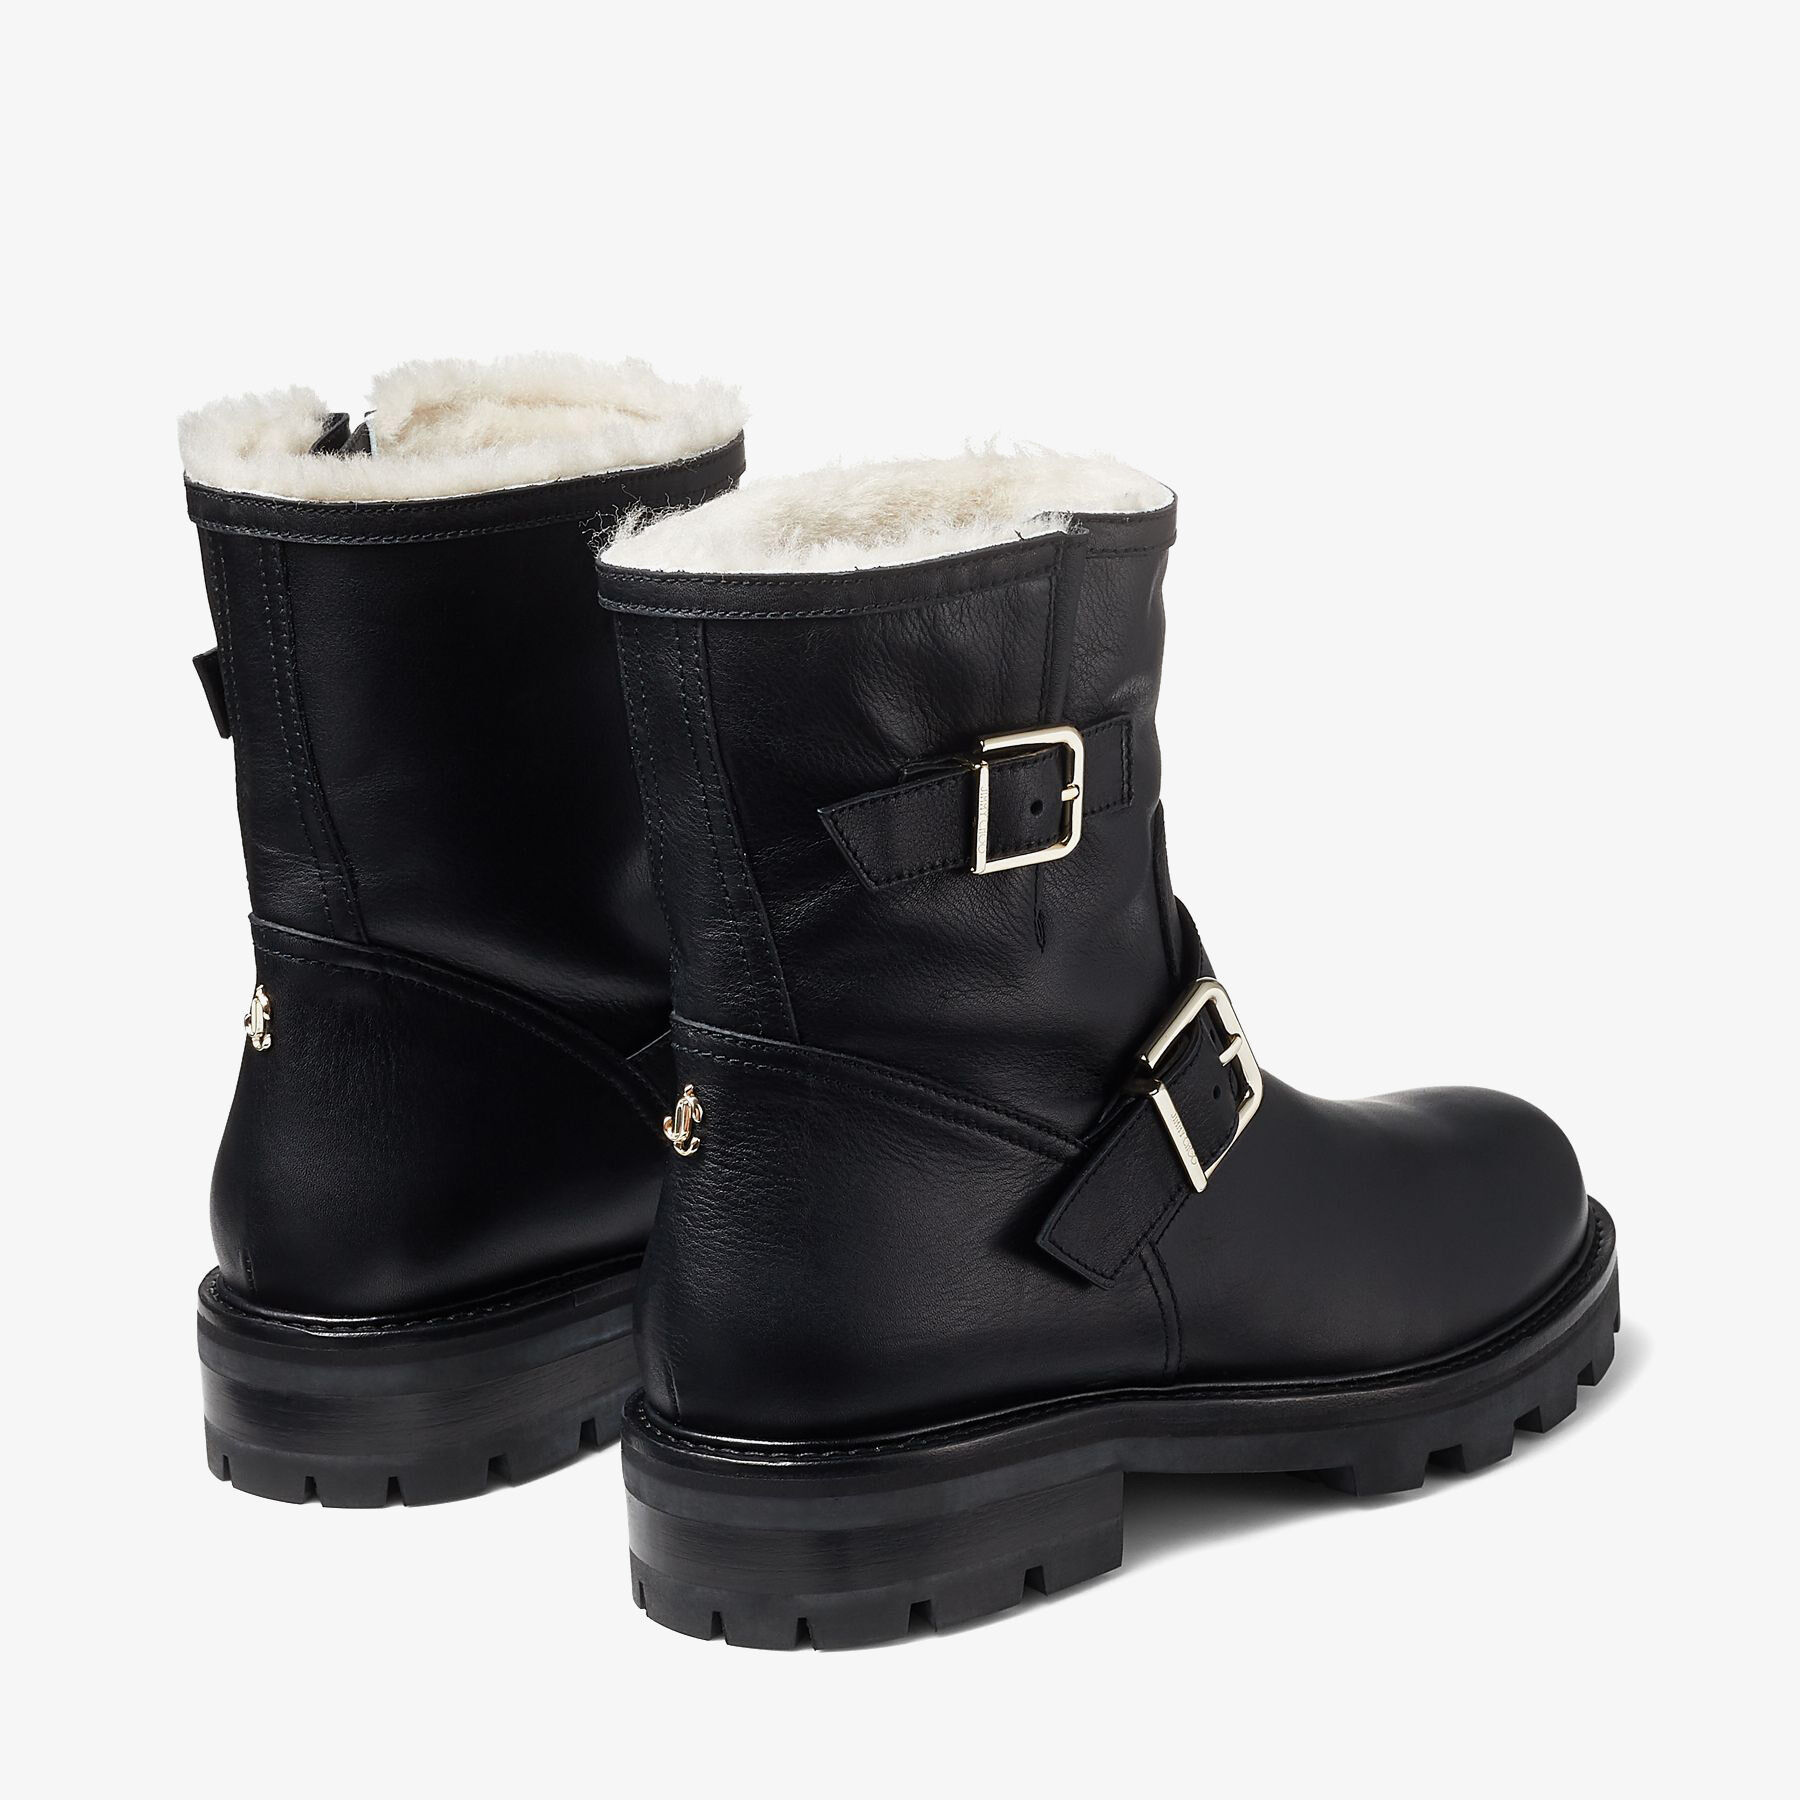 Black Smooth Leather Biker Boots with Gold Buckles and Shearling